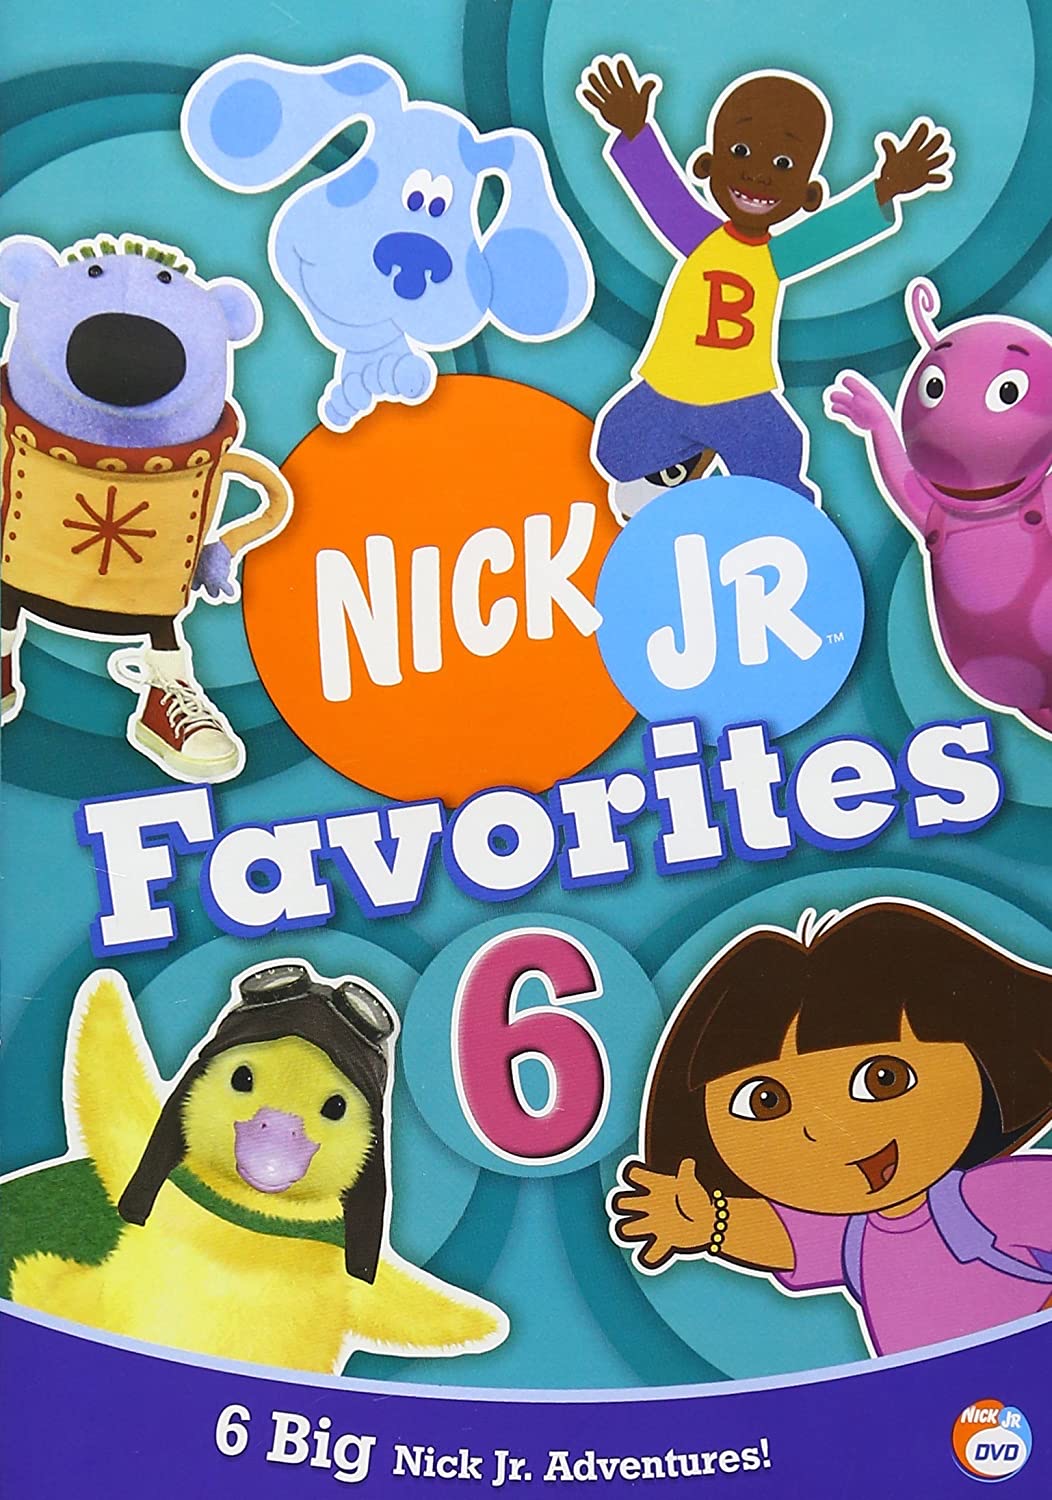 Nick Jr.: albums, songs, playlists